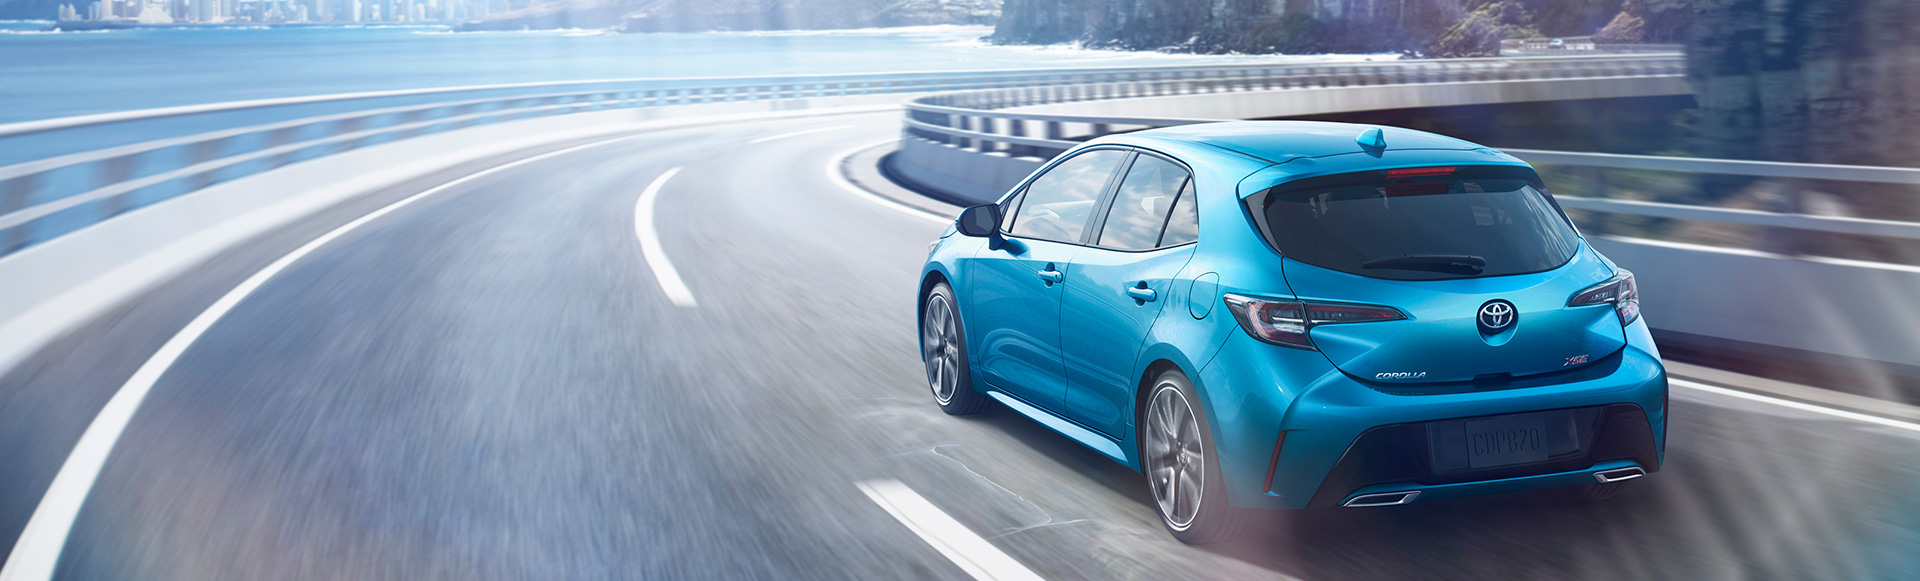 Hatch is Back! All-New 2019 Toyota Corolla Hatchback Wows at the 2018 New York International Auto Show